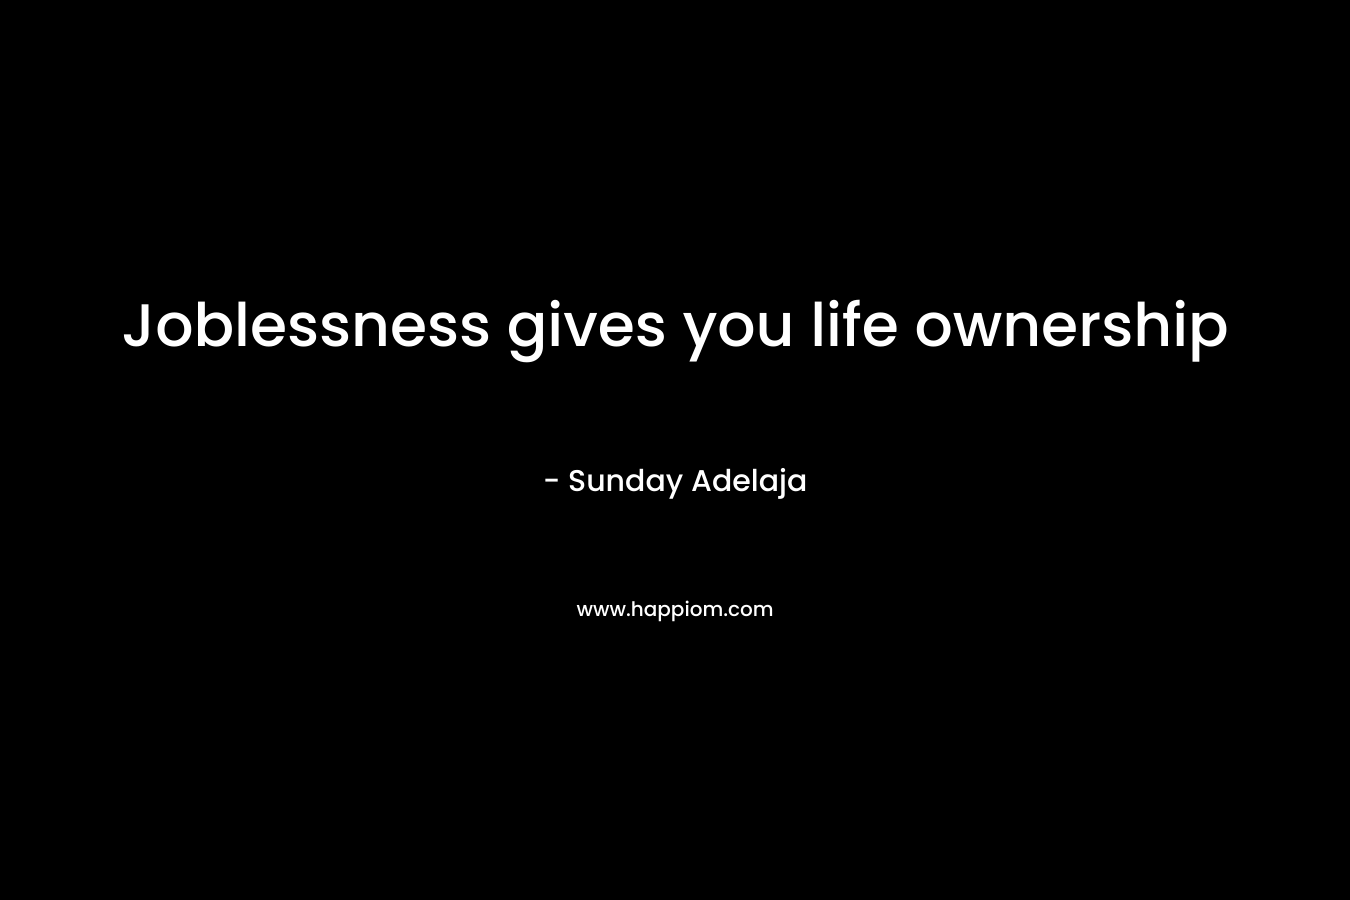 Joblessness gives you life ownership